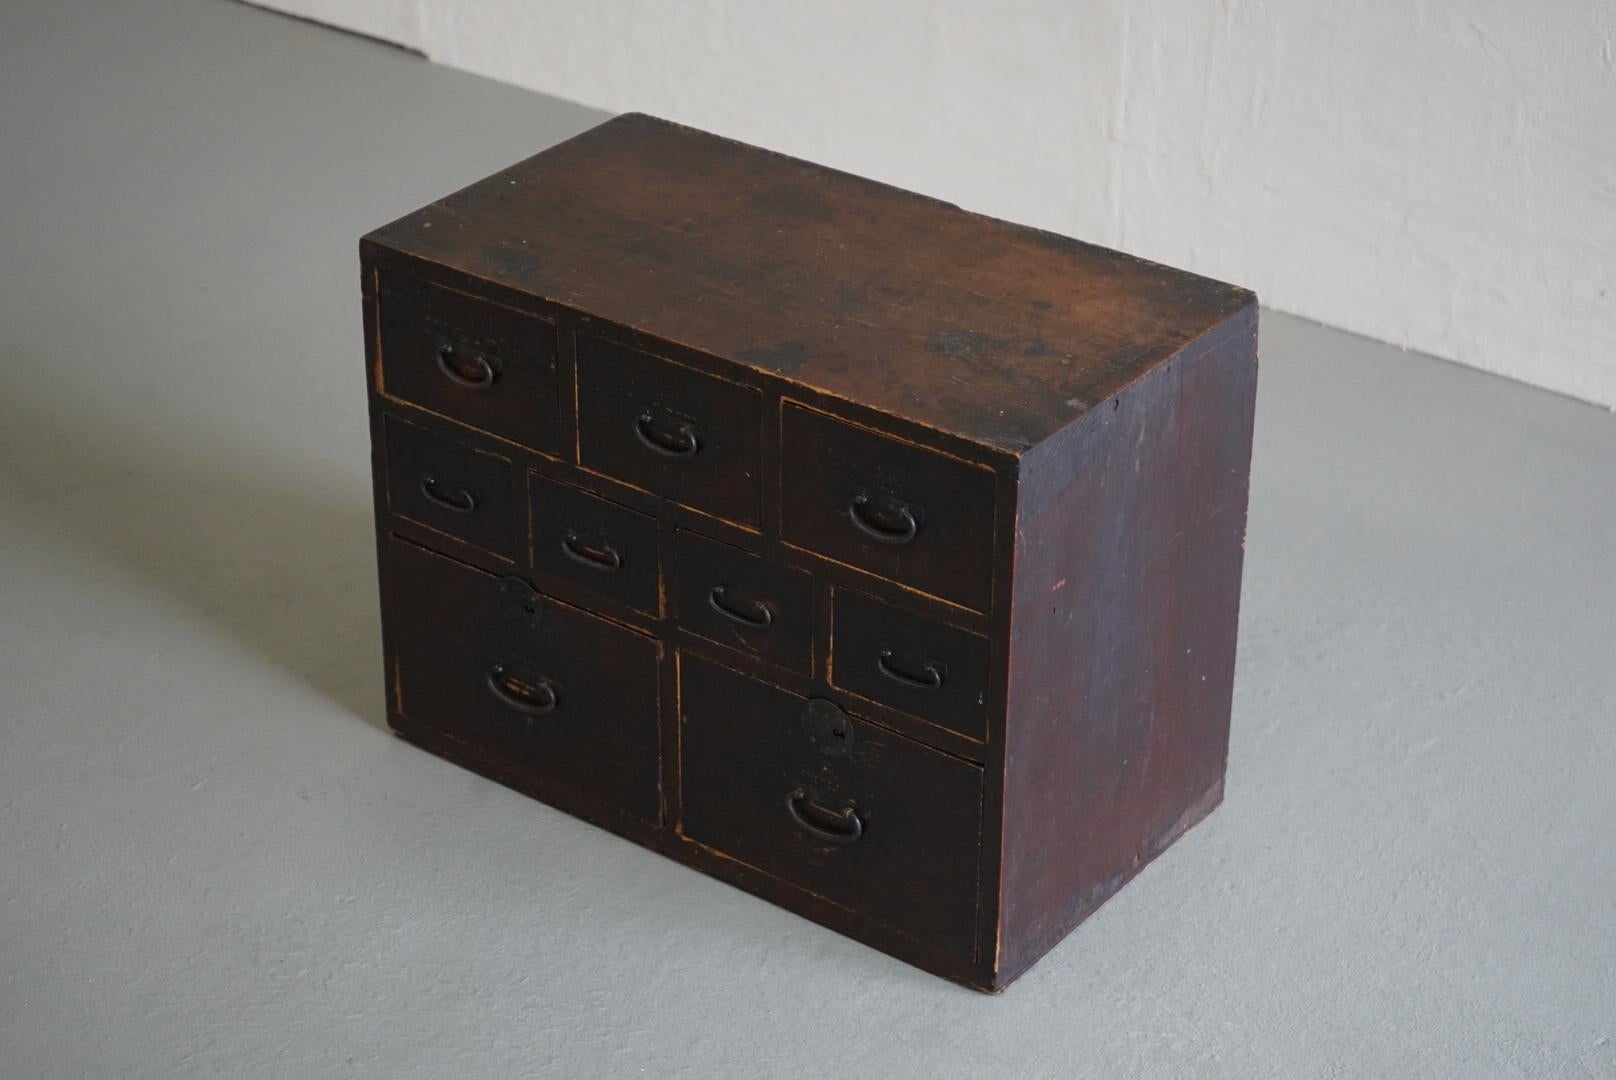 This is an old Japanese drawer.

The color that has deepened over time is very beautiful.
The material is unknown, but it is well made.

There are 9 drawers in total, which are useful for storing small items.

The handle is made of iron.
One plate